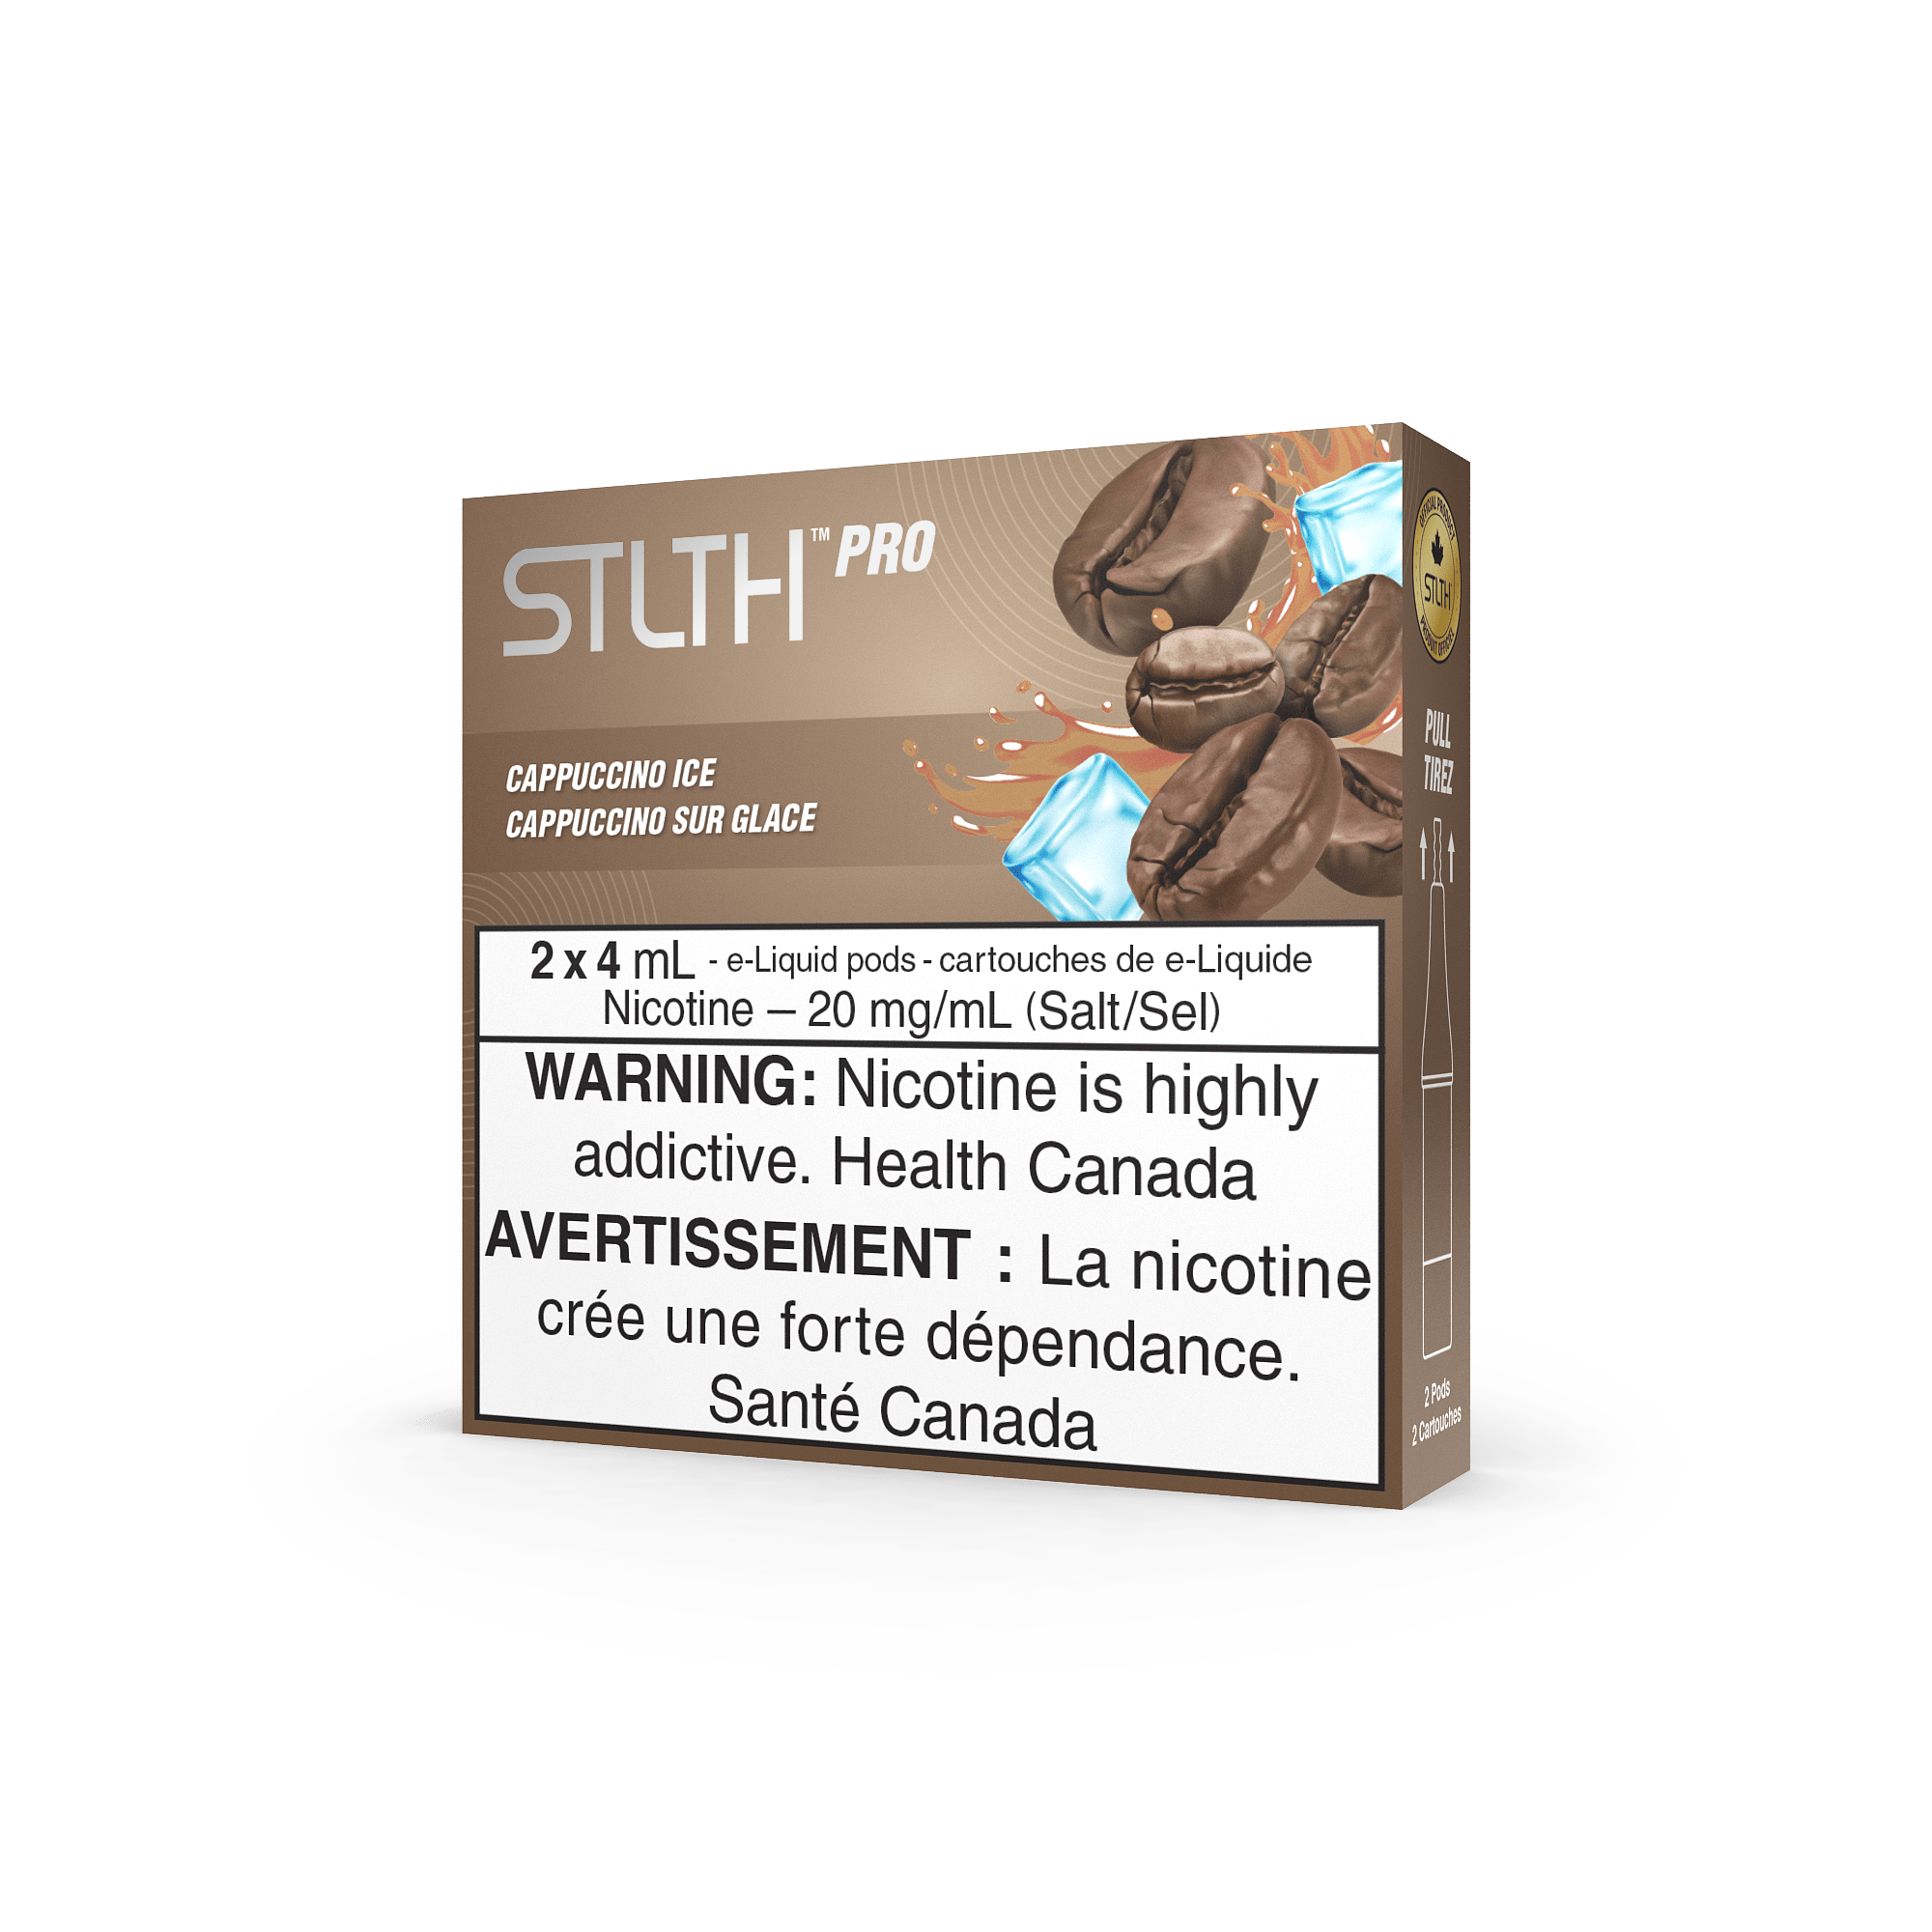 STLTH Pro - Cappuccino Ice Vape Pod available on Canada online vape shop